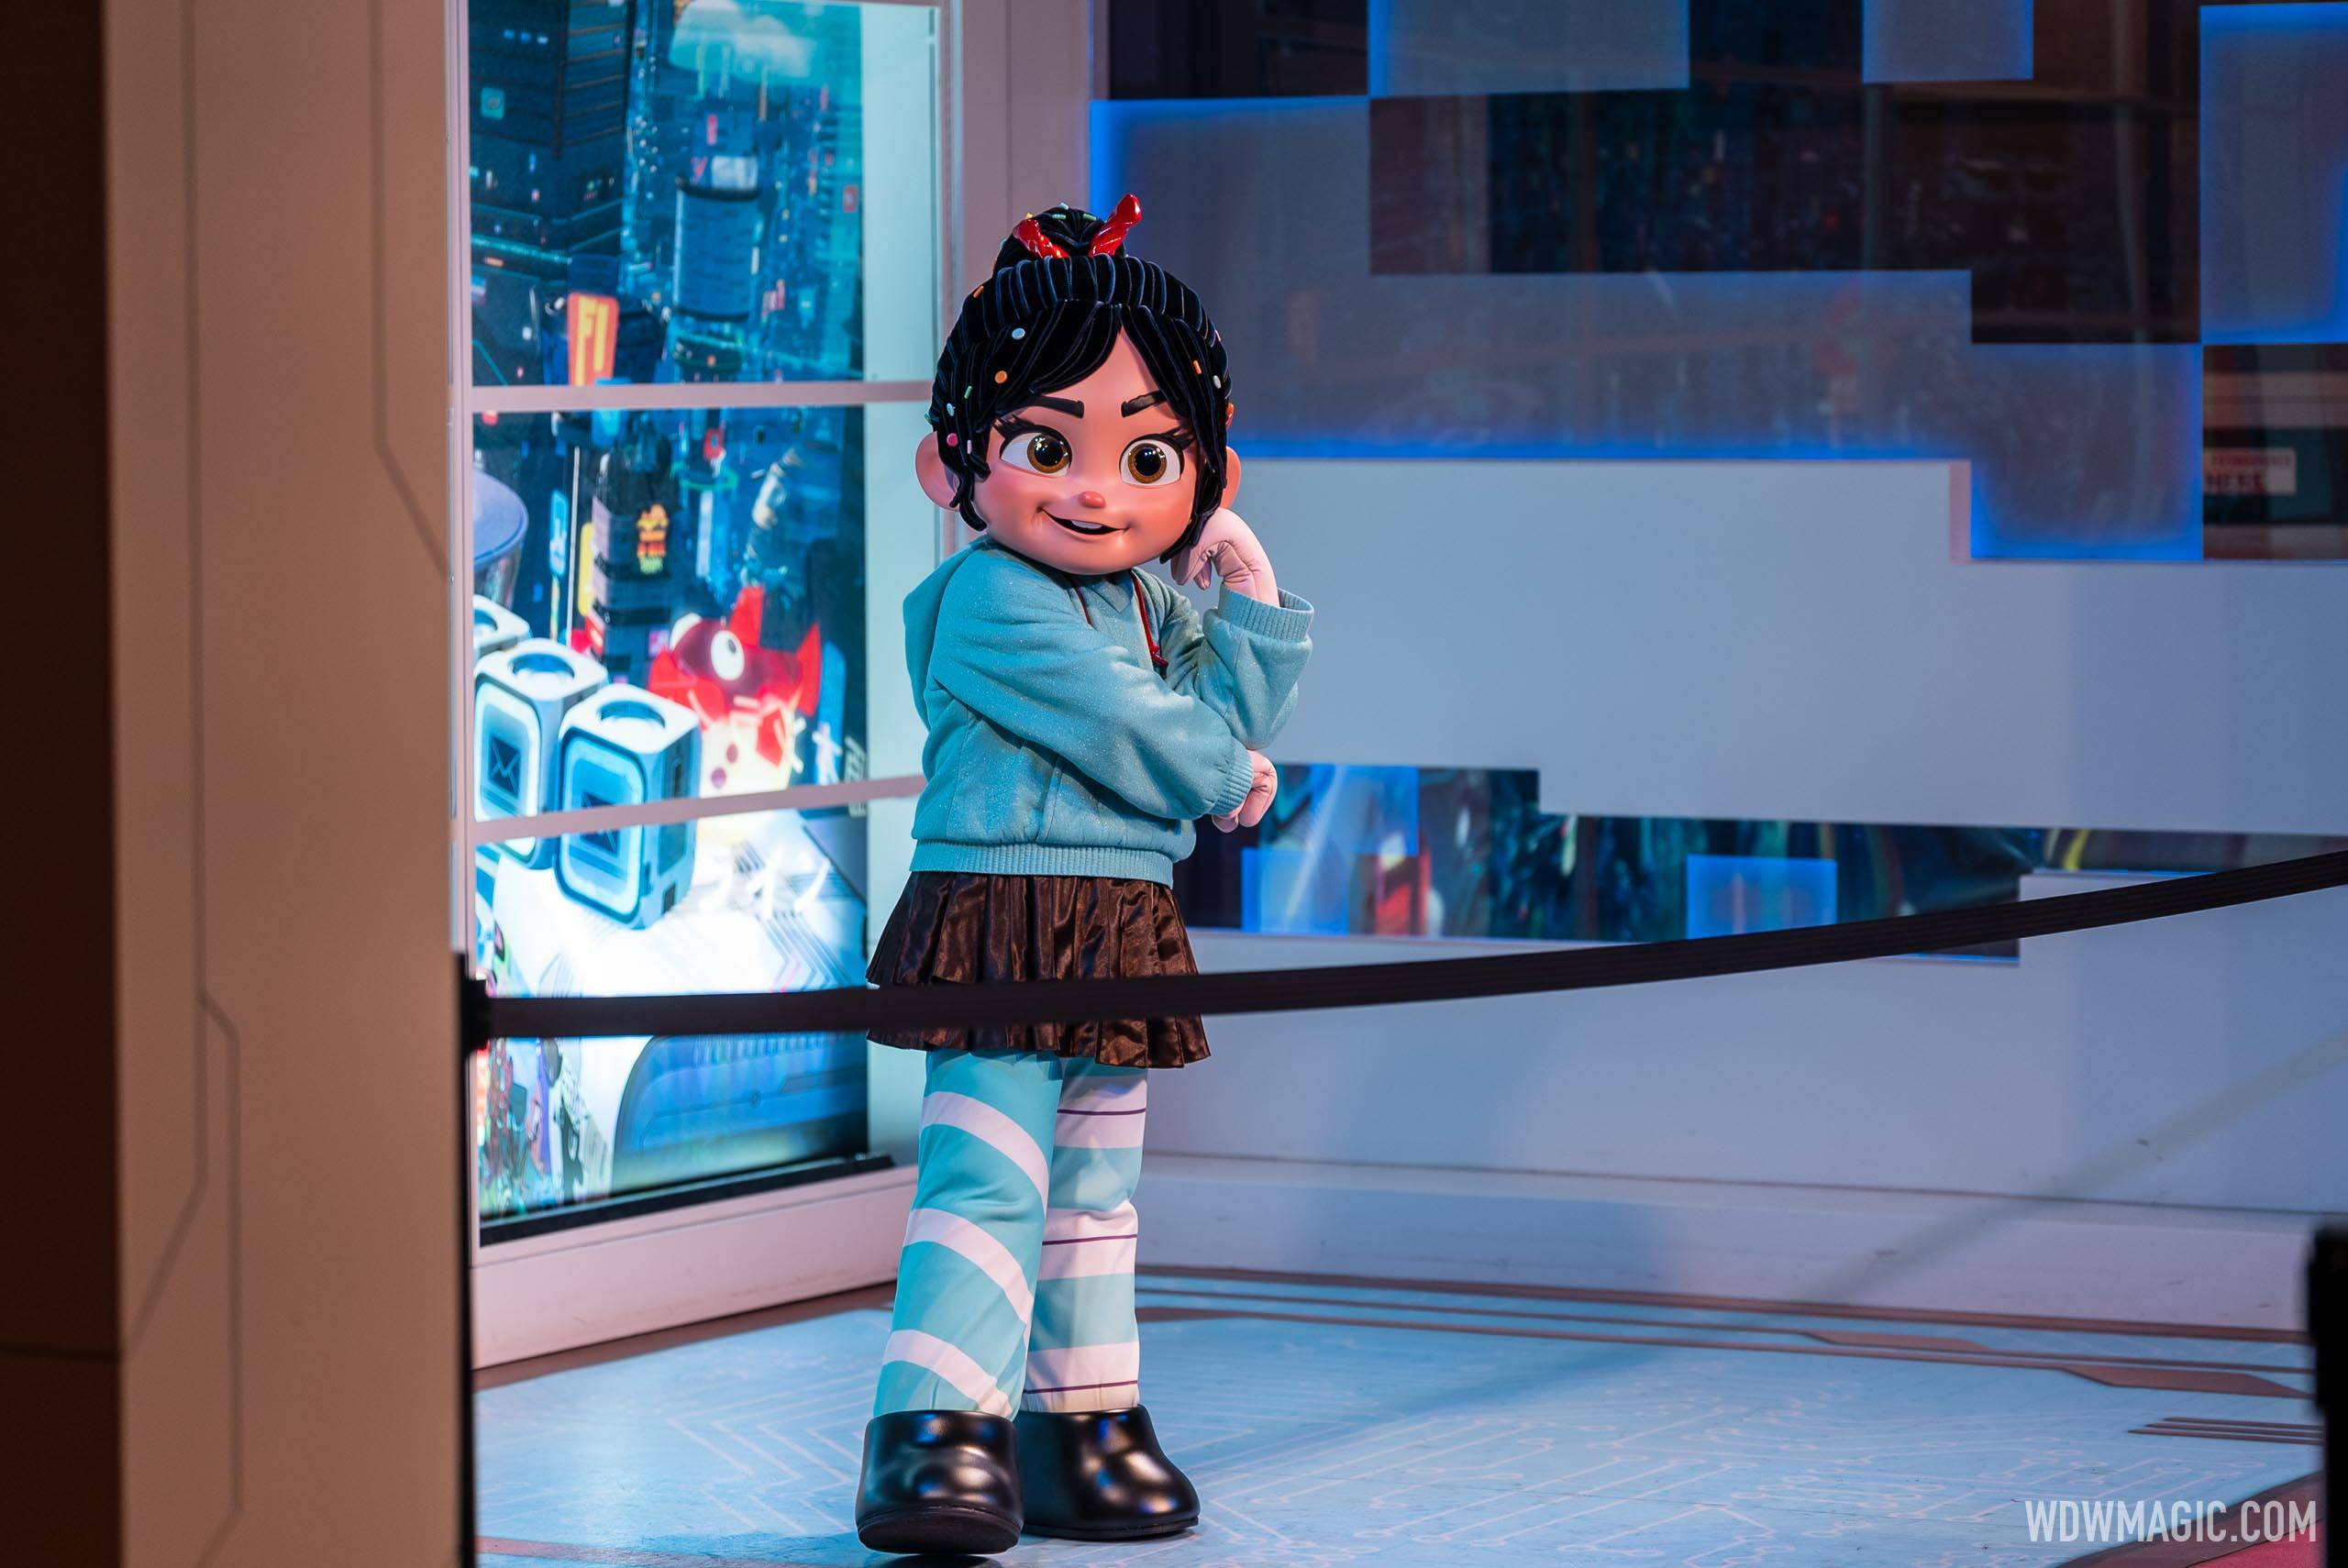 Vanellope and Joy meet and greet at ImageWorks - January 2021